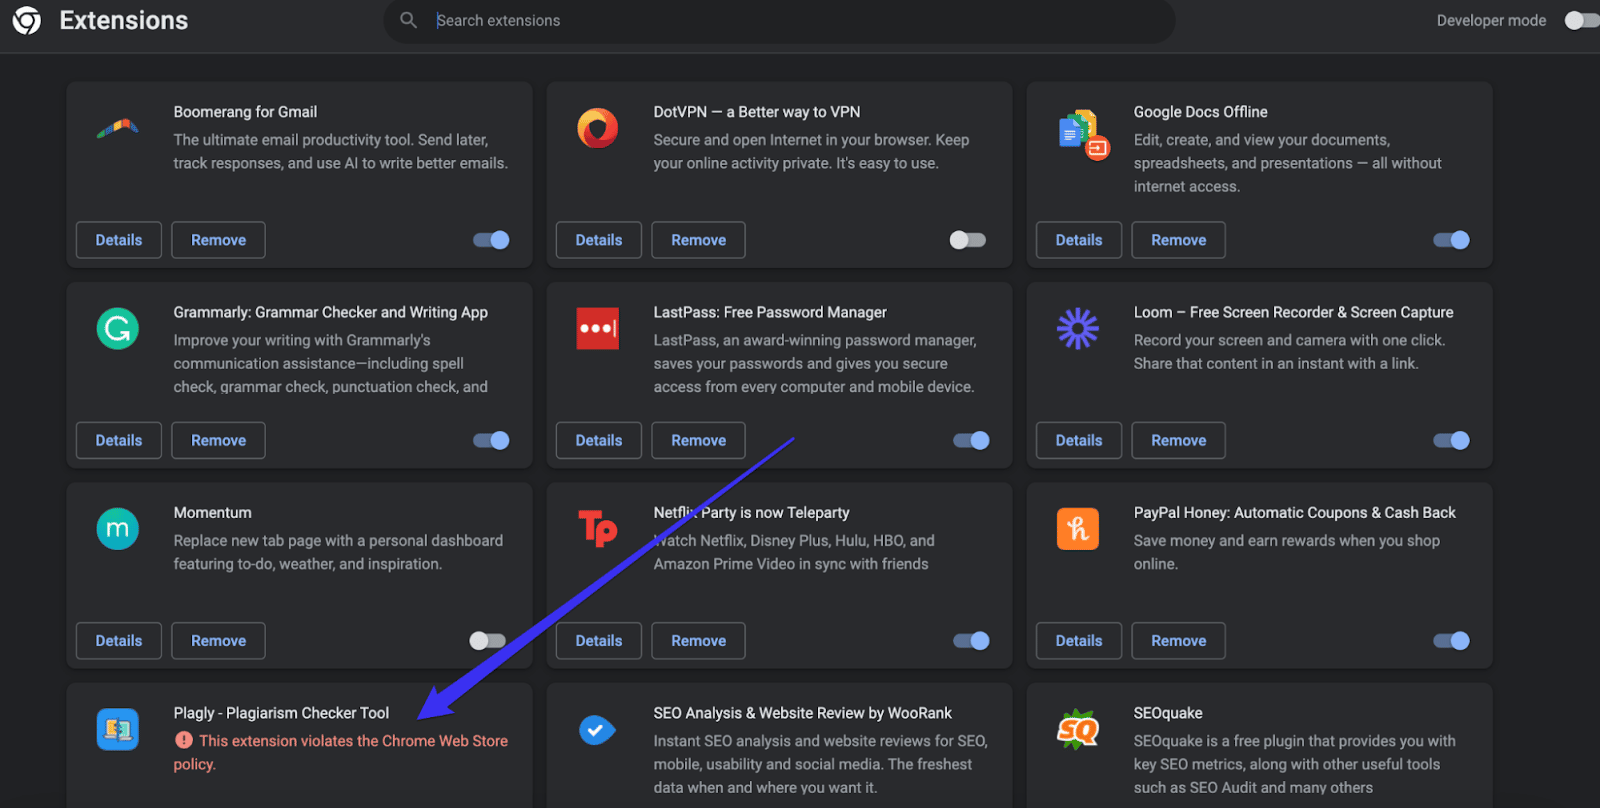 The Google Chrome Extensions Manager lists all of your extensions